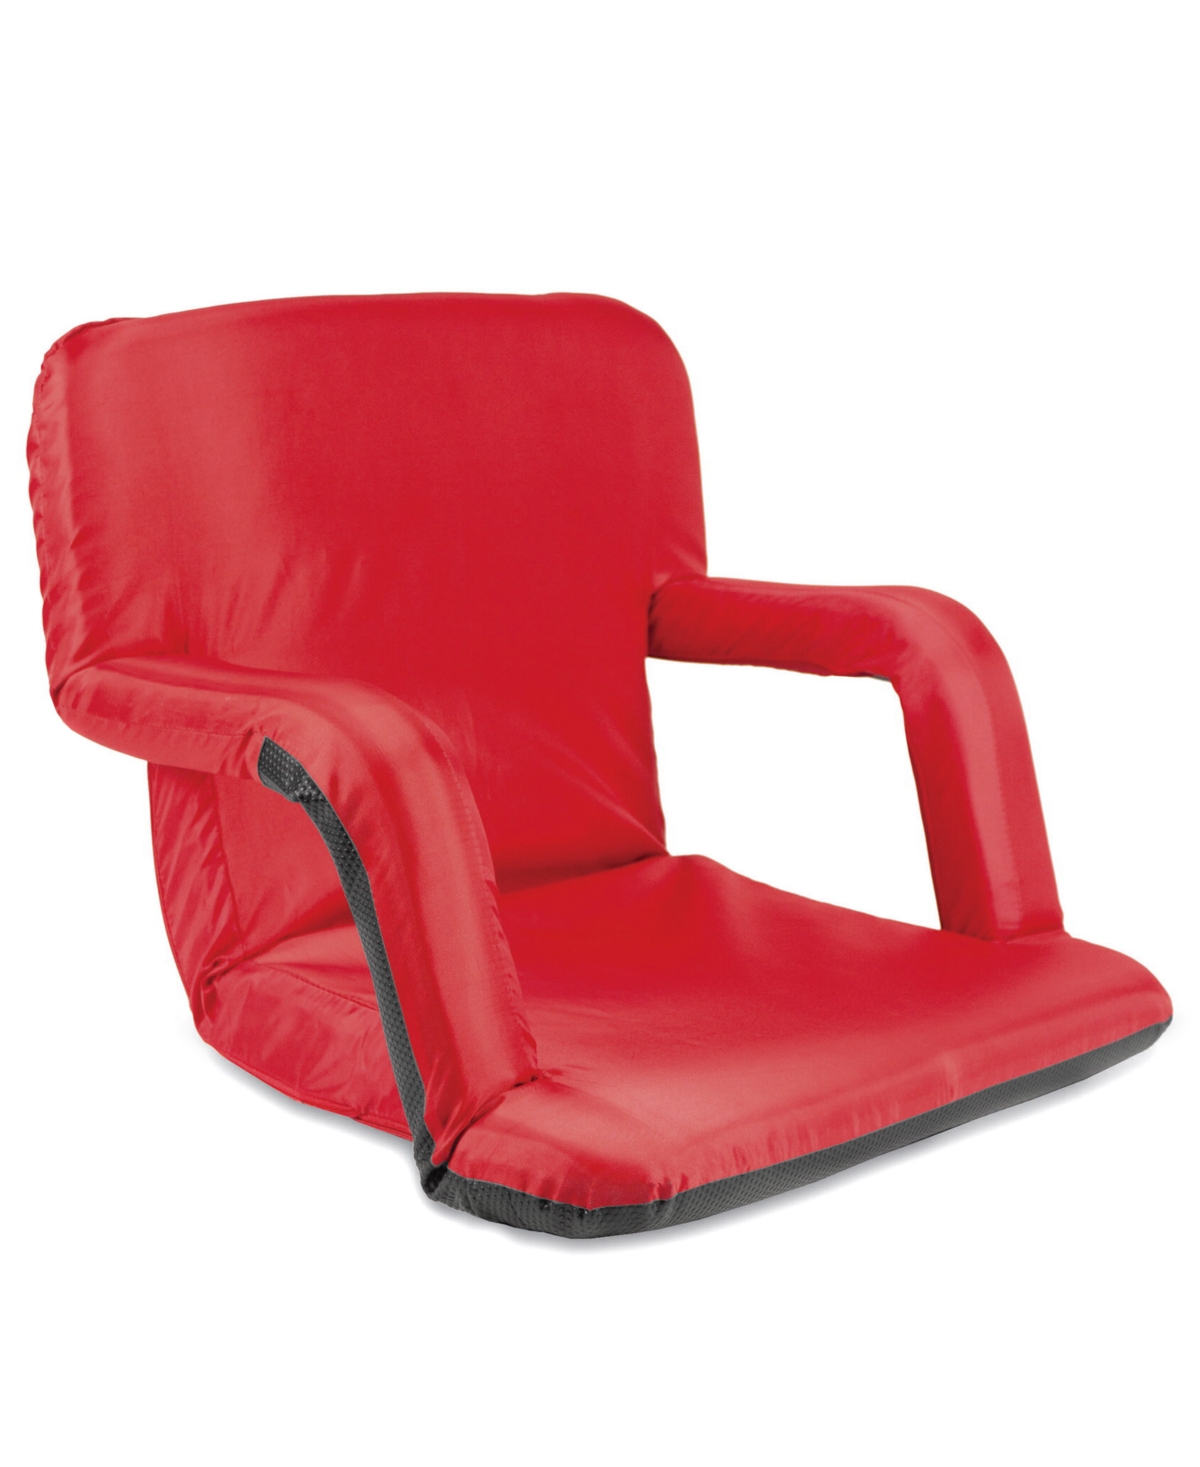 Oniva by Picnic Time Ventura Portable Reclining Stadium Seat - Red